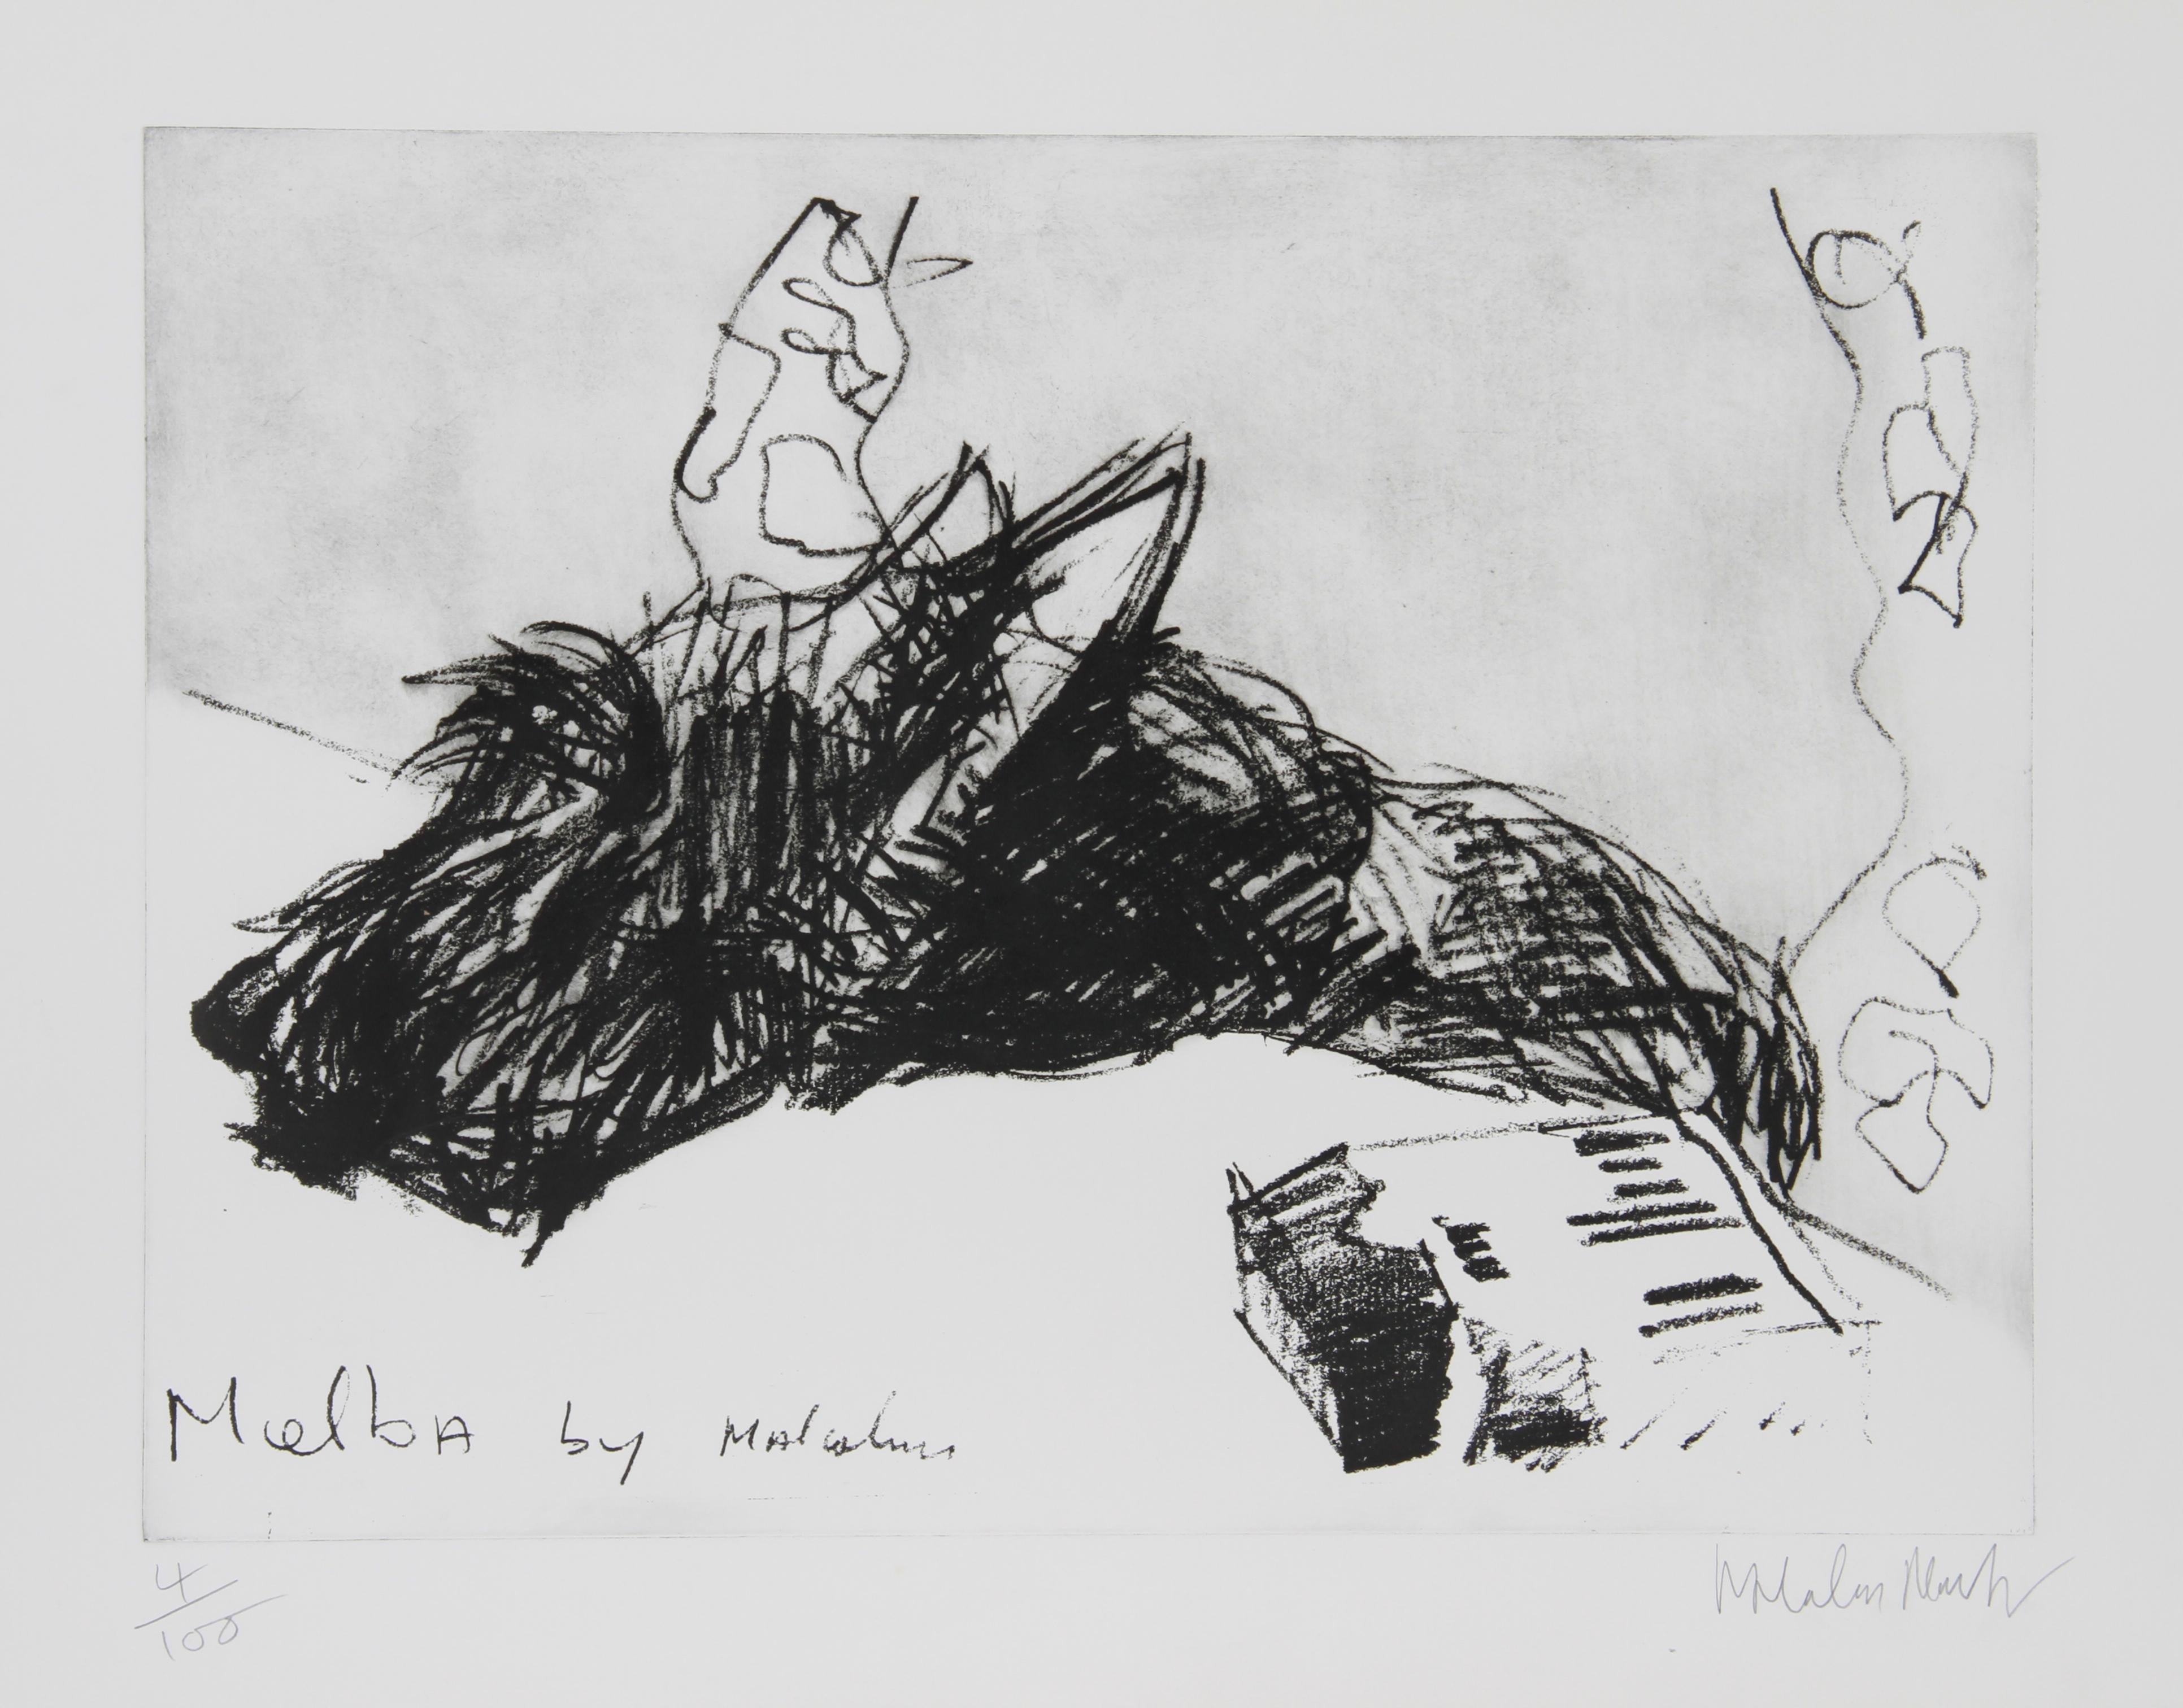 "Melba by Malcolm" Etching by Malcolm Morley